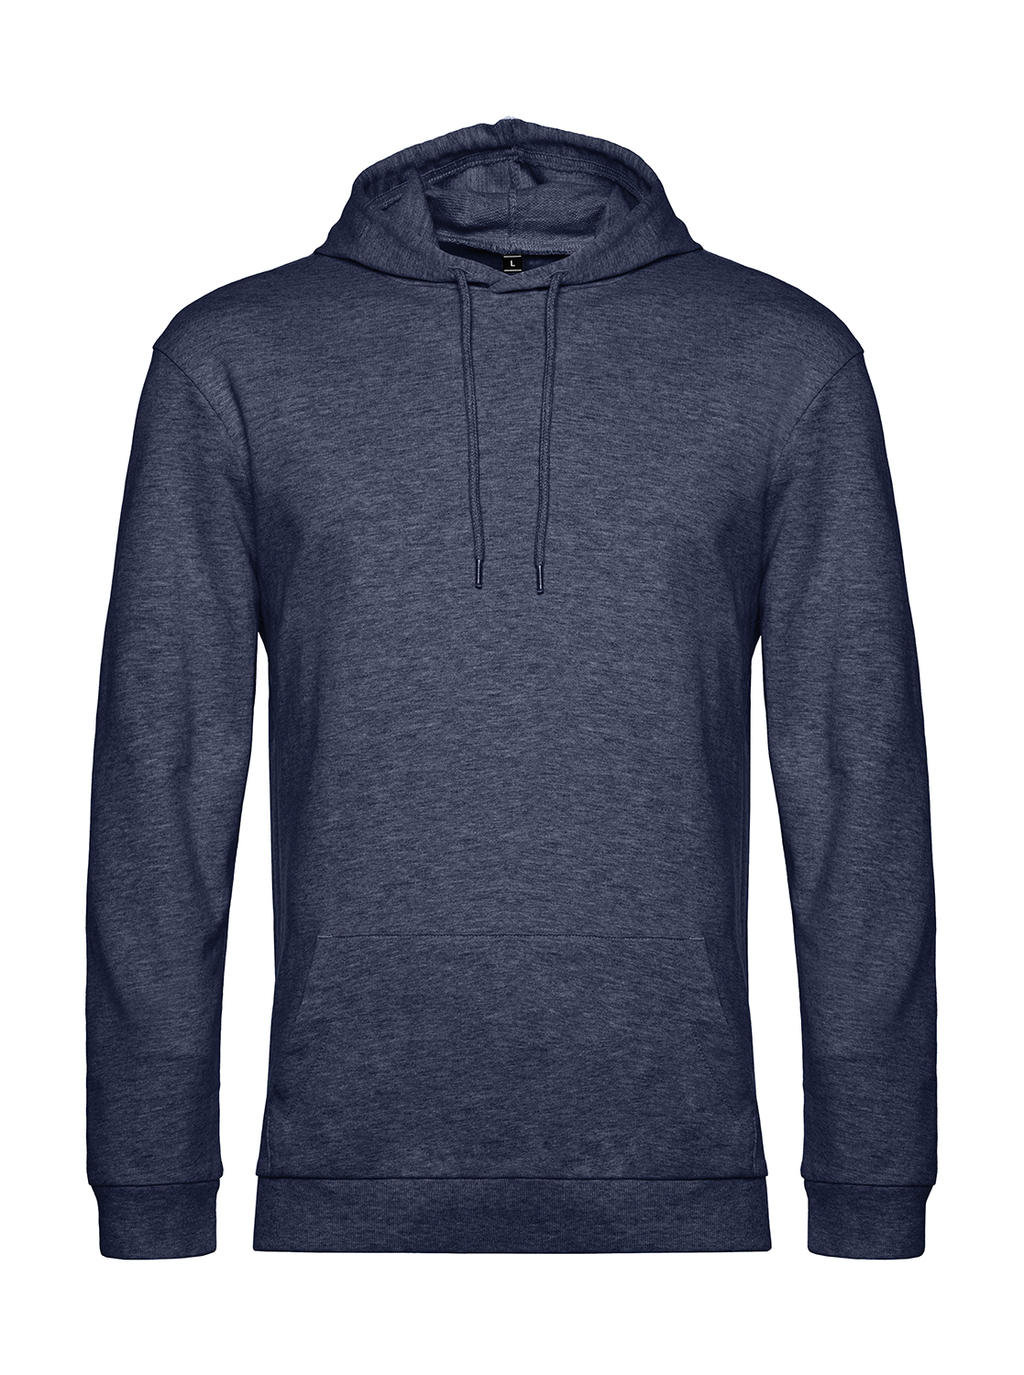  #Hoodie French Terry in Farbe Heather Navy